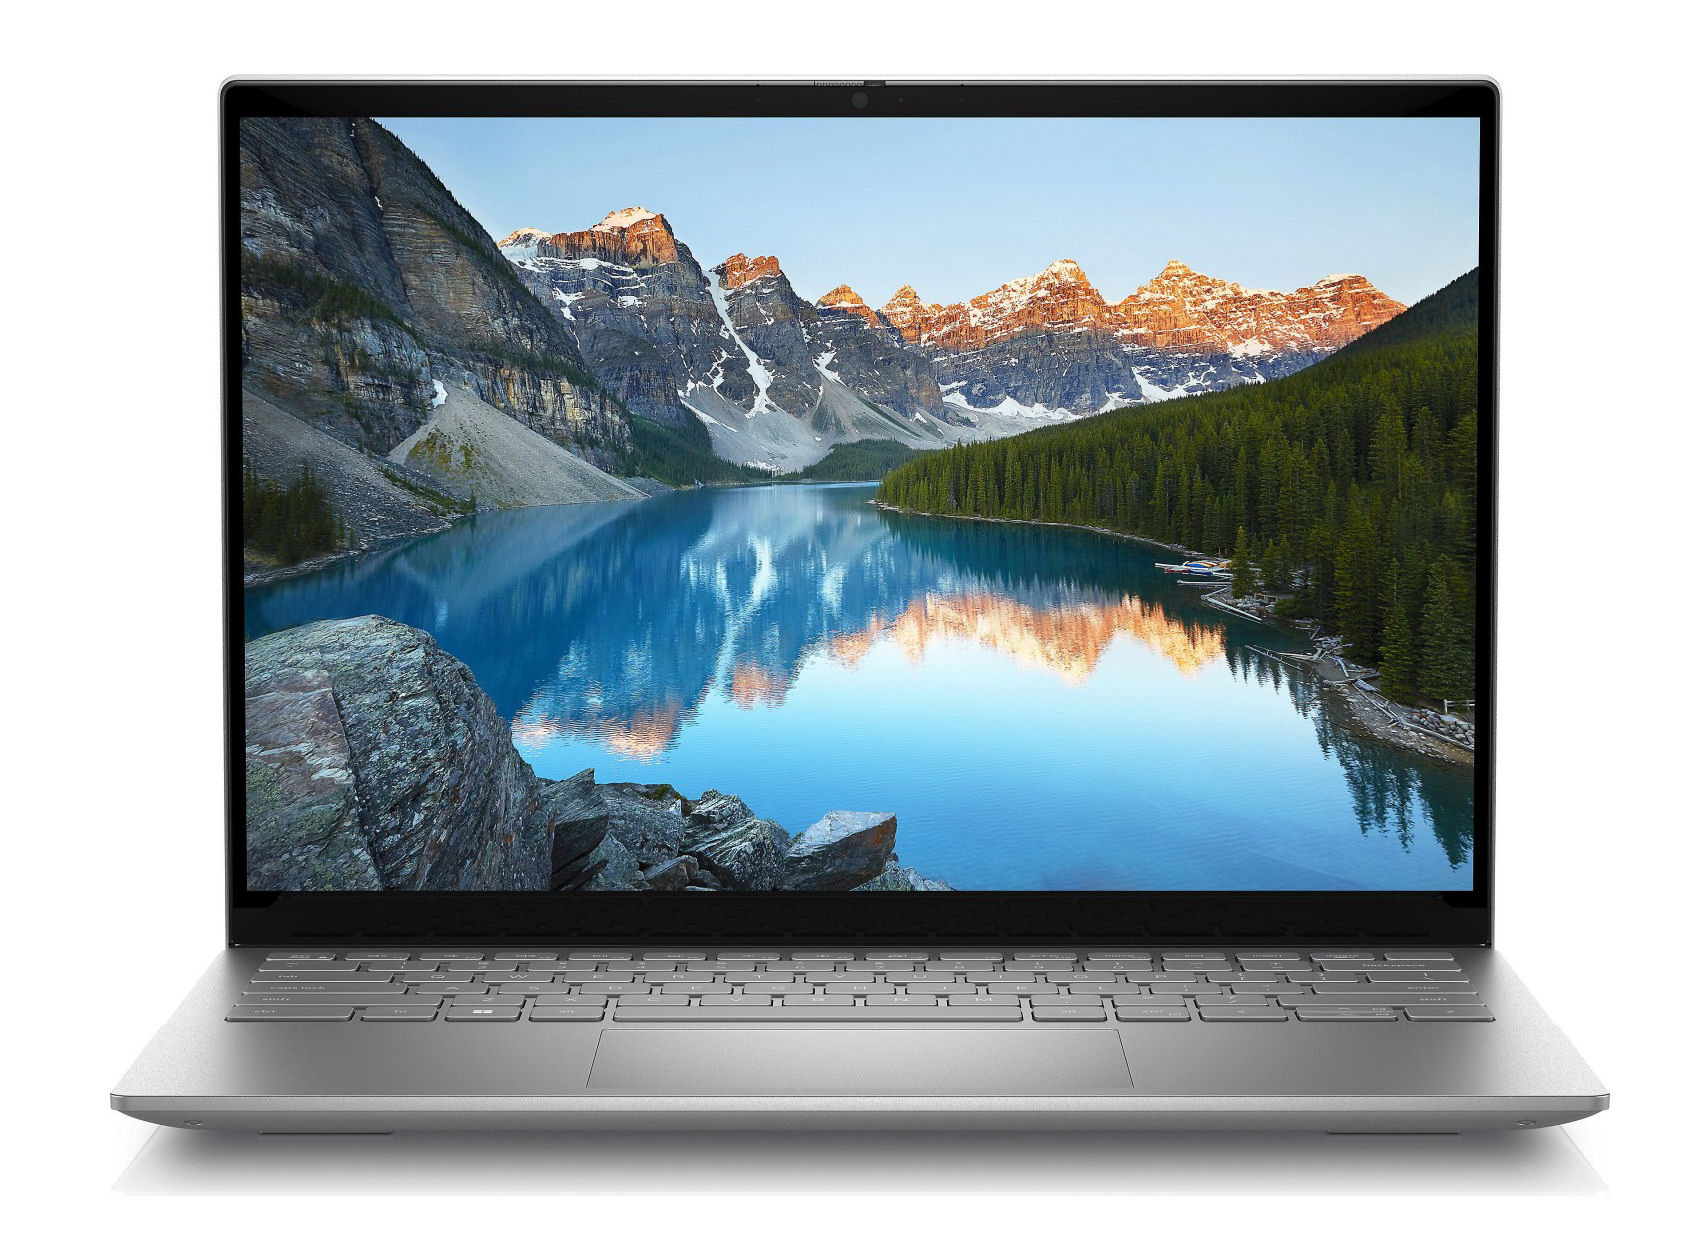 Dell Inspiron 14 5425 clearance sale knocks massive 36% off retail